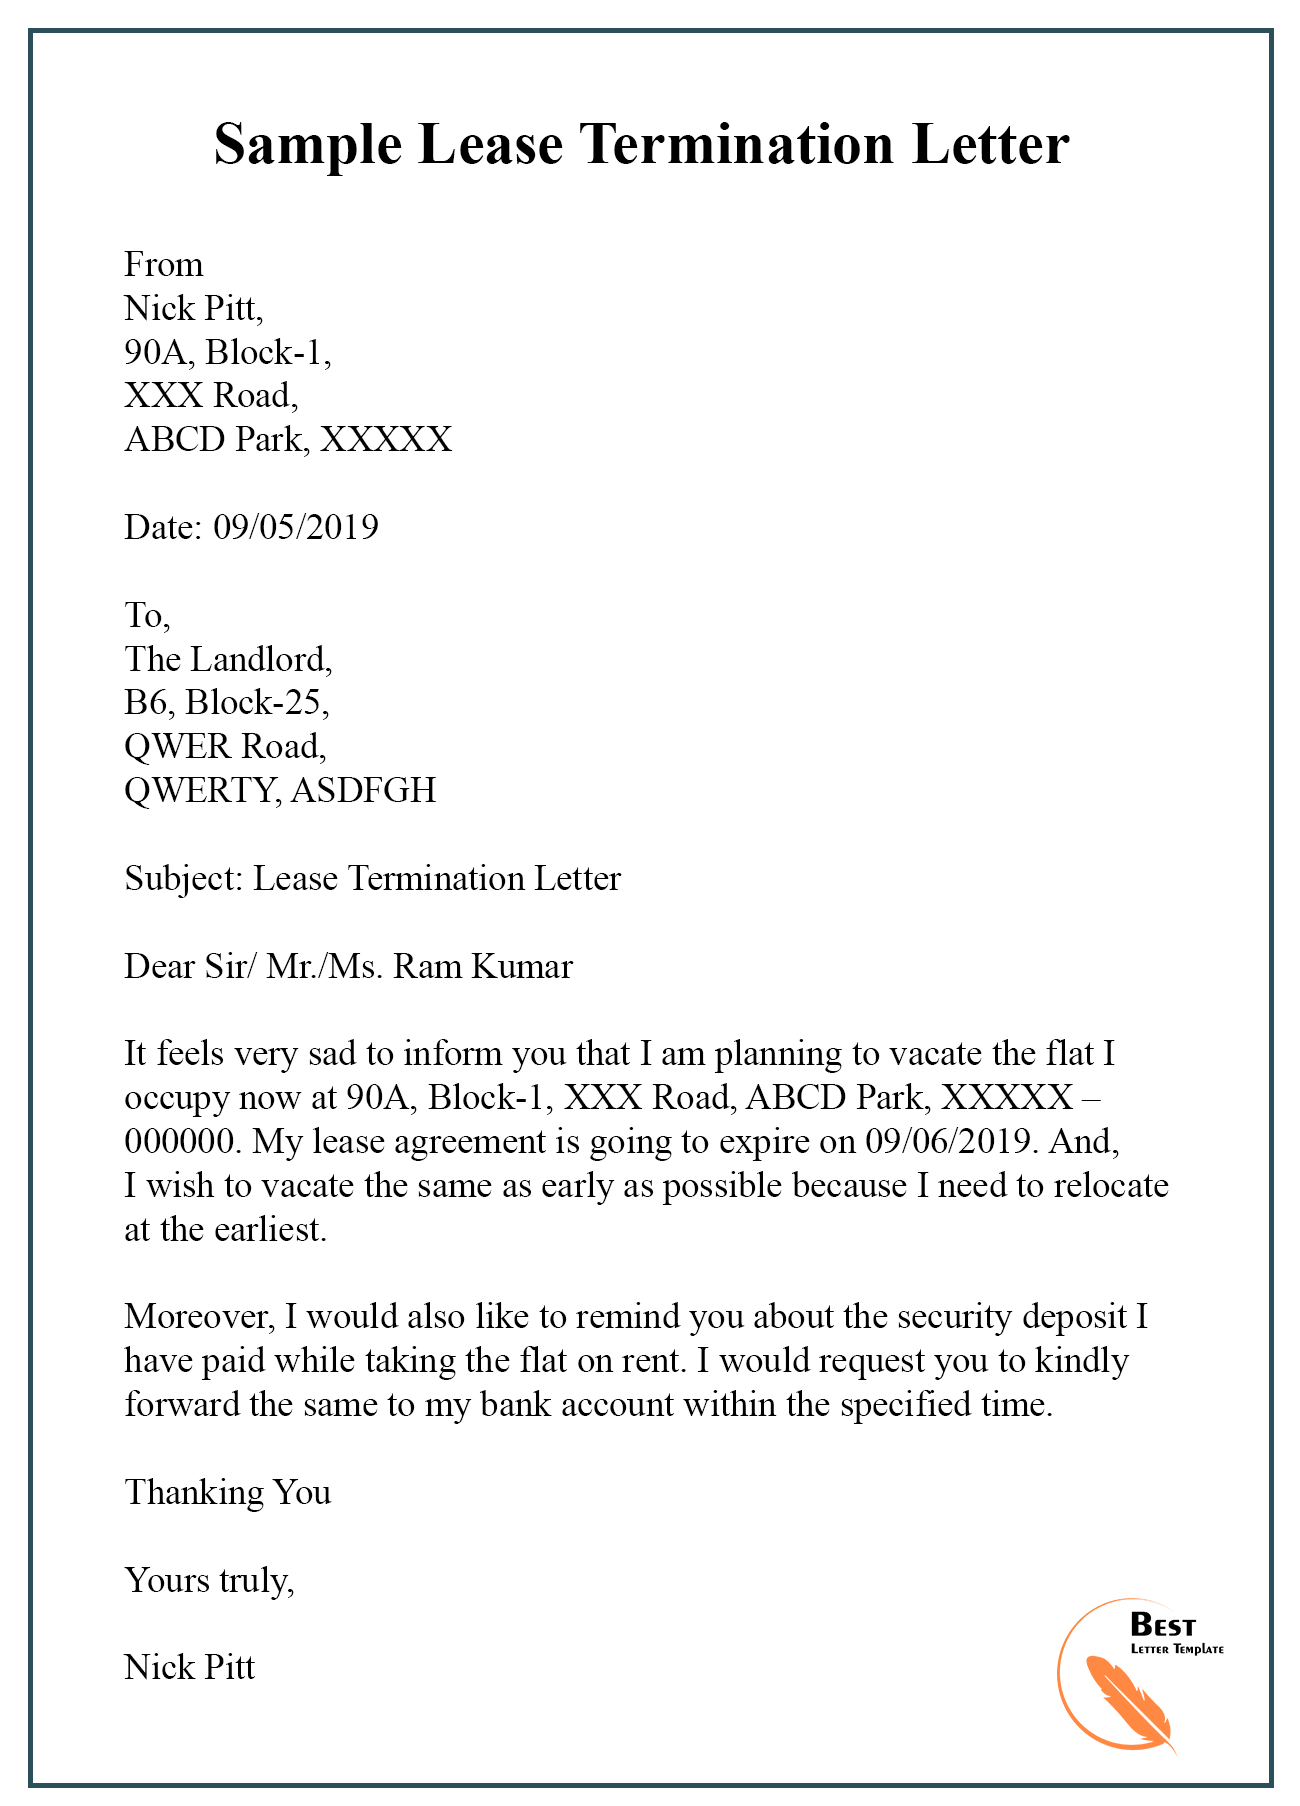 Apartment Lease Early Termination Letter from bestlettertemplate.com